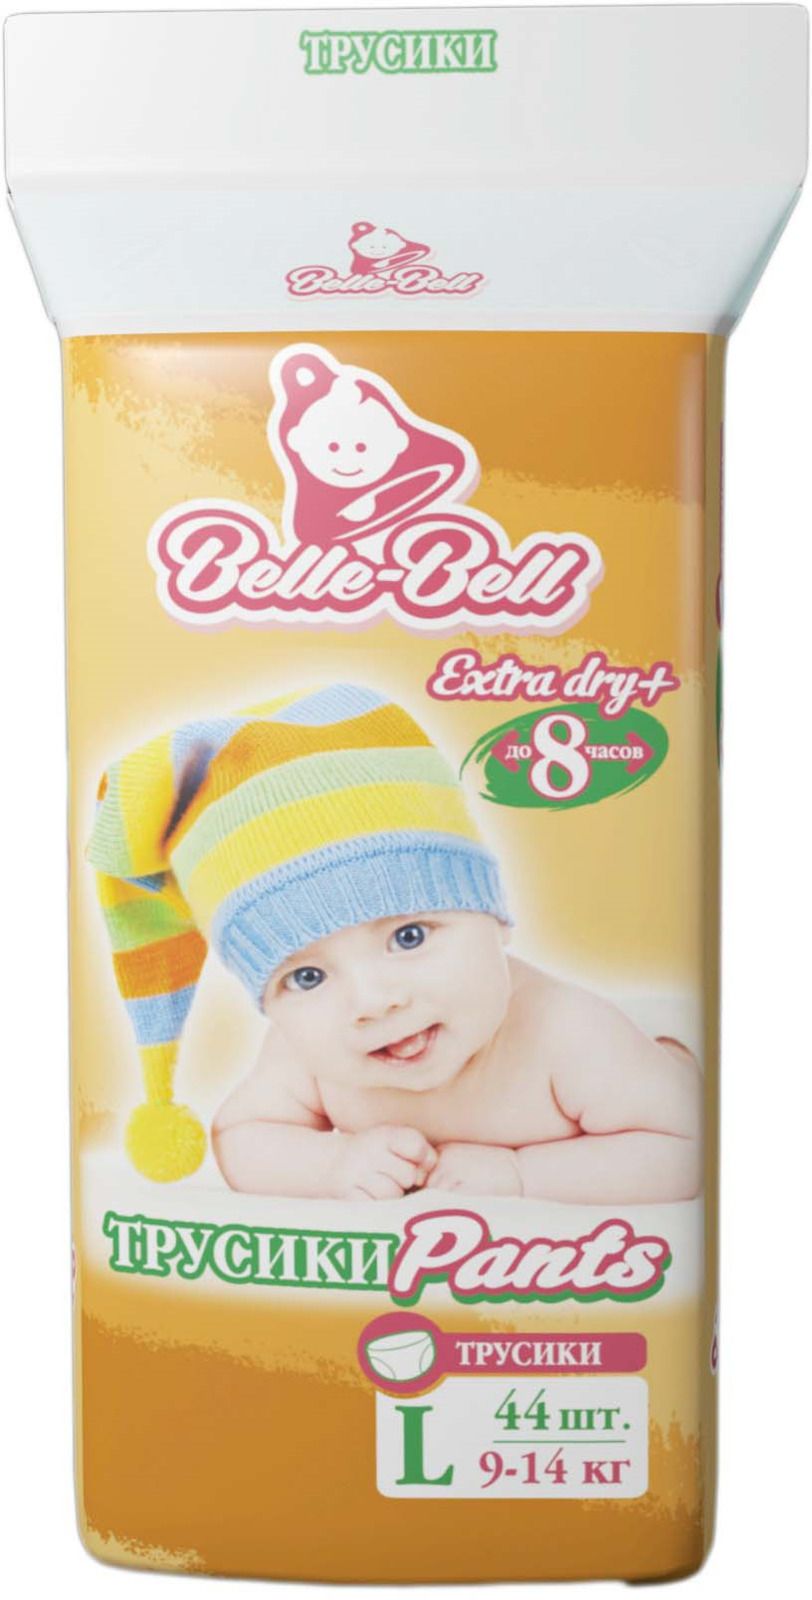 - Belle-Bell Extra dry+,  L, 9-14 , 44 